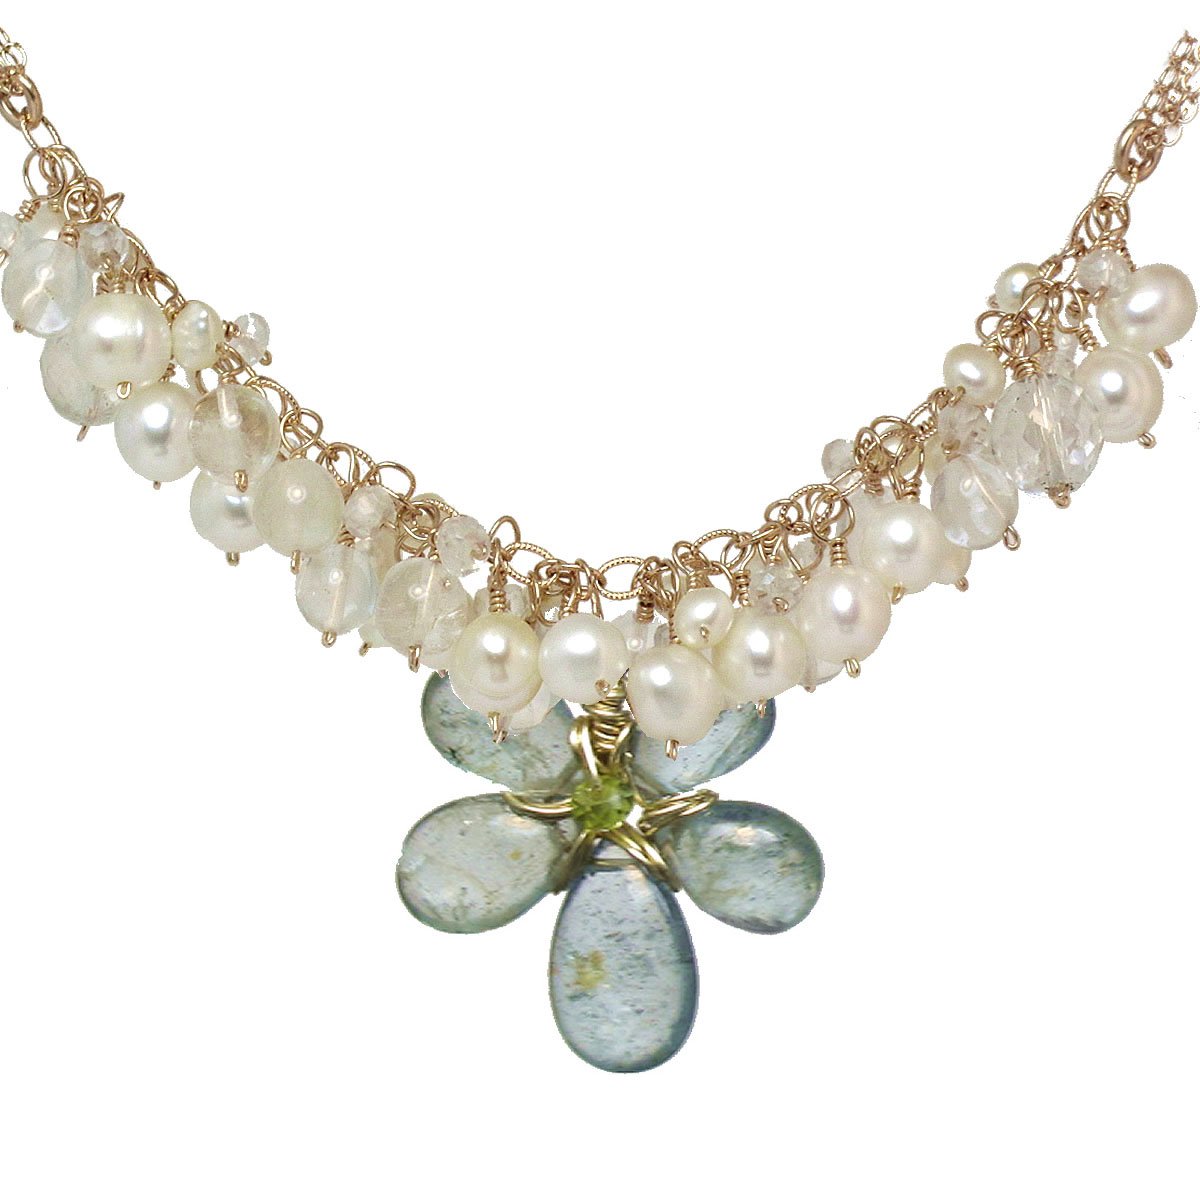 The Island Pearl | Aquamarine and Freshwater Pearl Necklace | Artfully  Elegant — Handmade Jewelry & Handcrafted Gifts